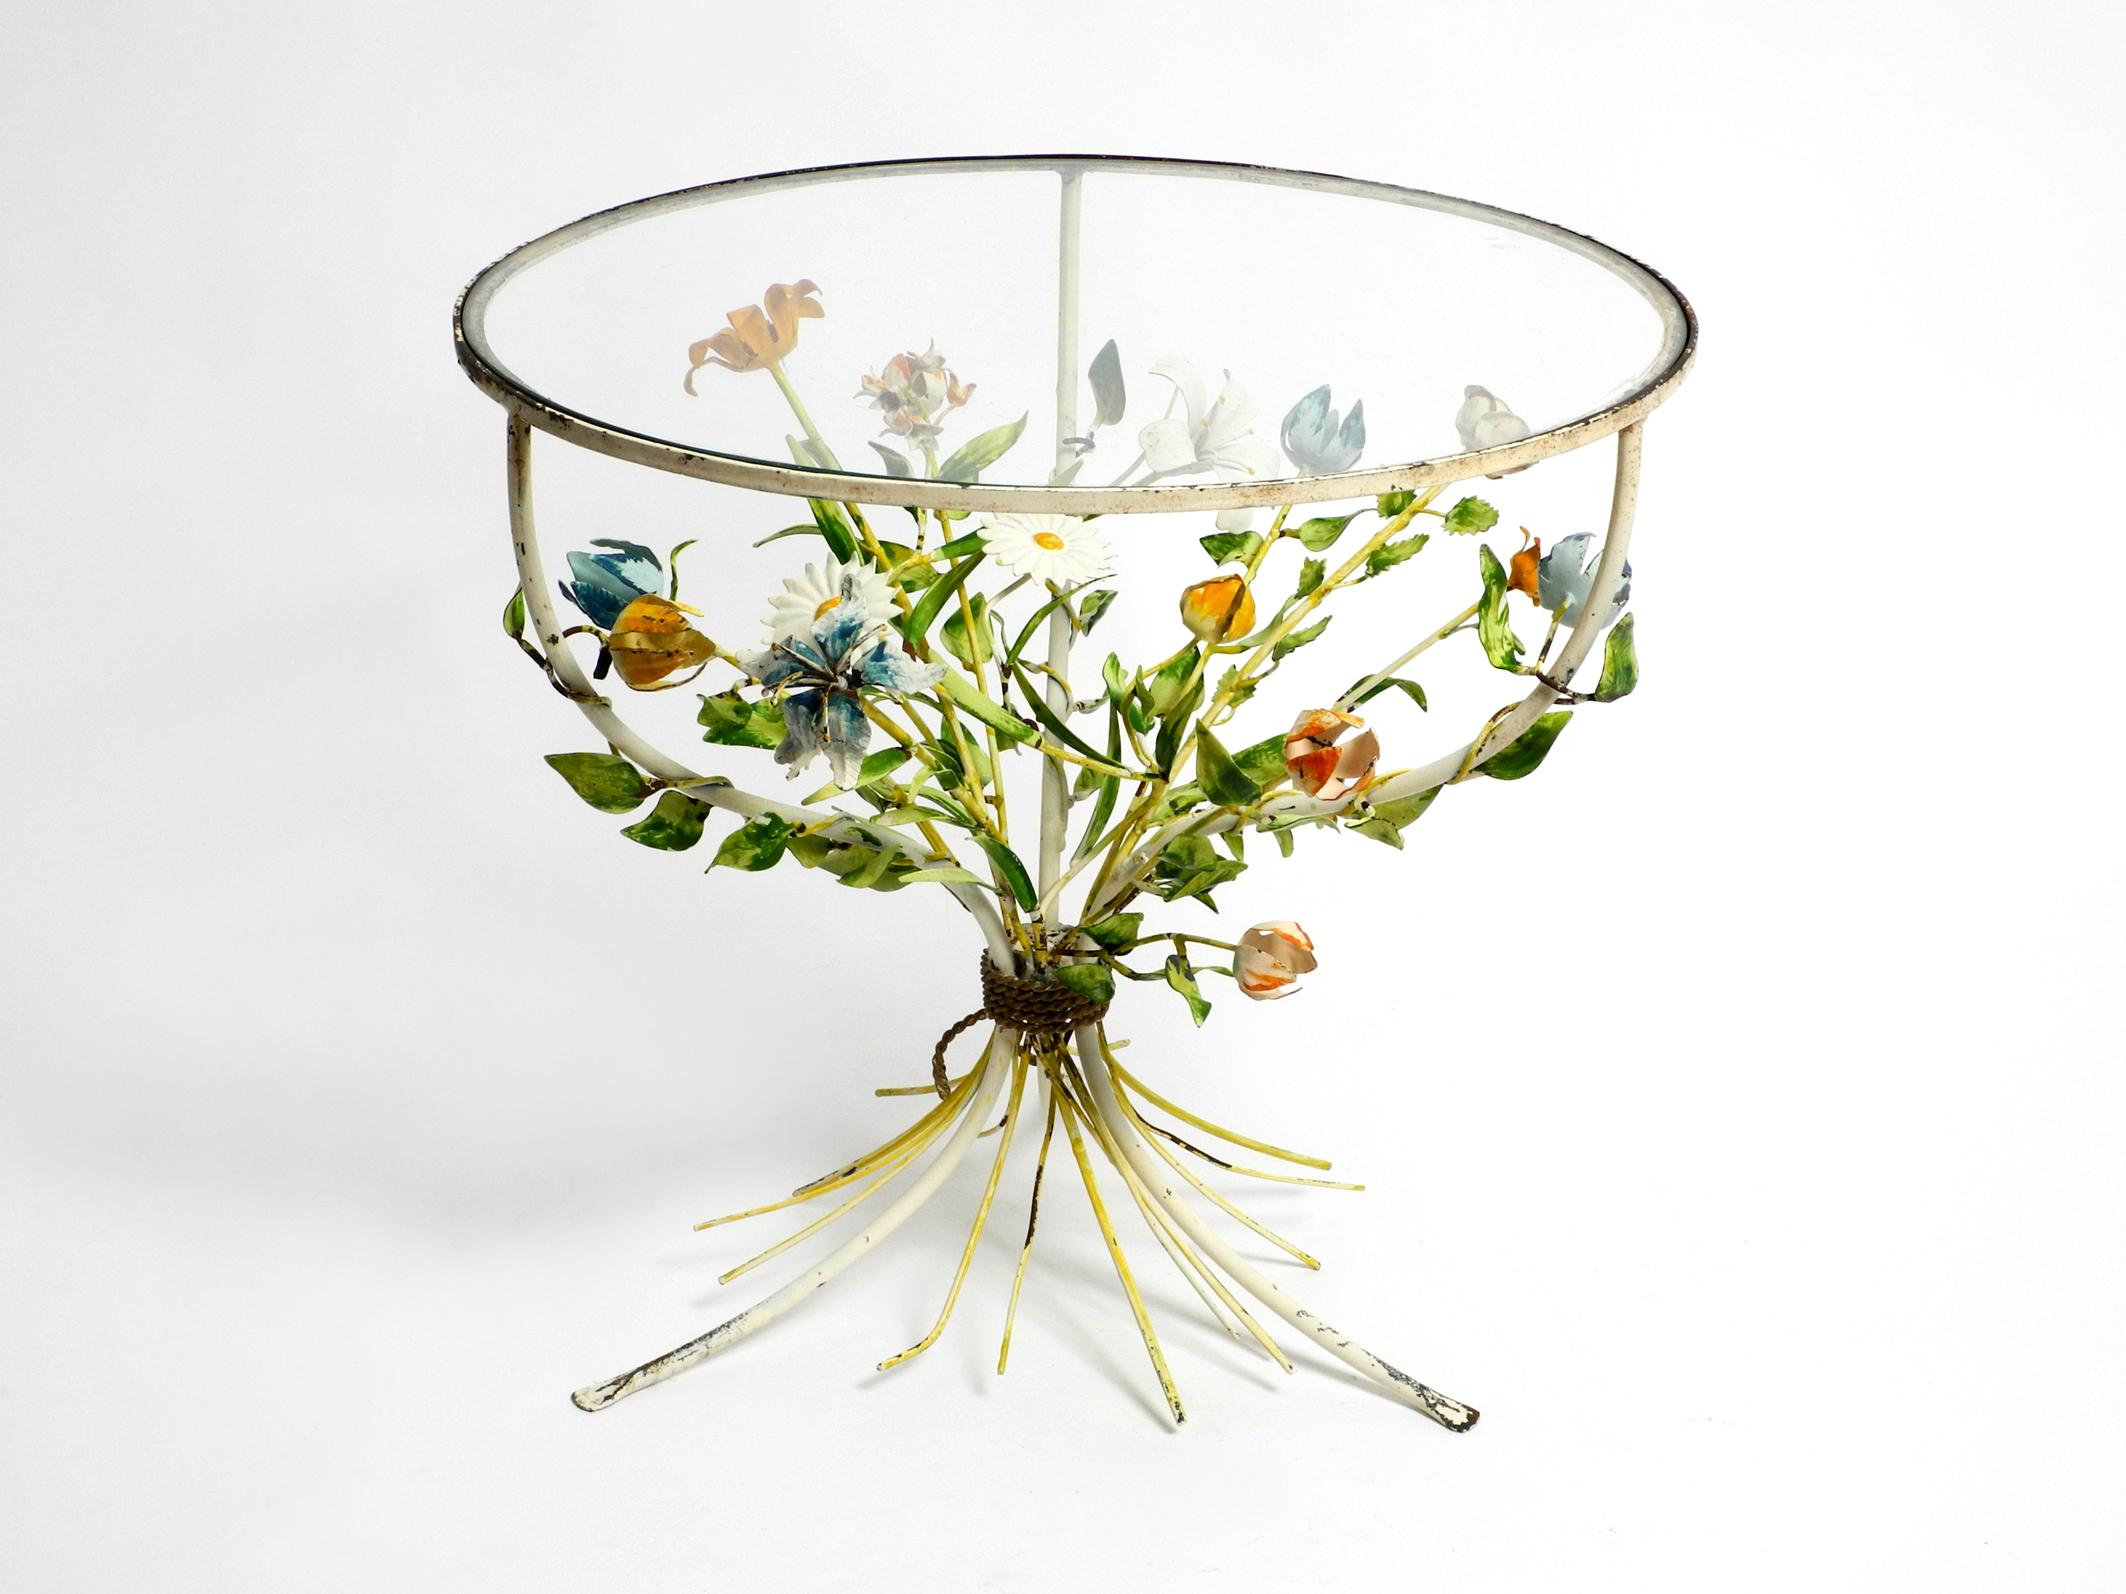 Very rare Italian original mid century glass metal side table.
Beautiful floral 1950s design in a good vintage condition.
Round tripod frame made entirely of metal in the middle with lots of leaves and flowers.
Very high quality made, leaves and